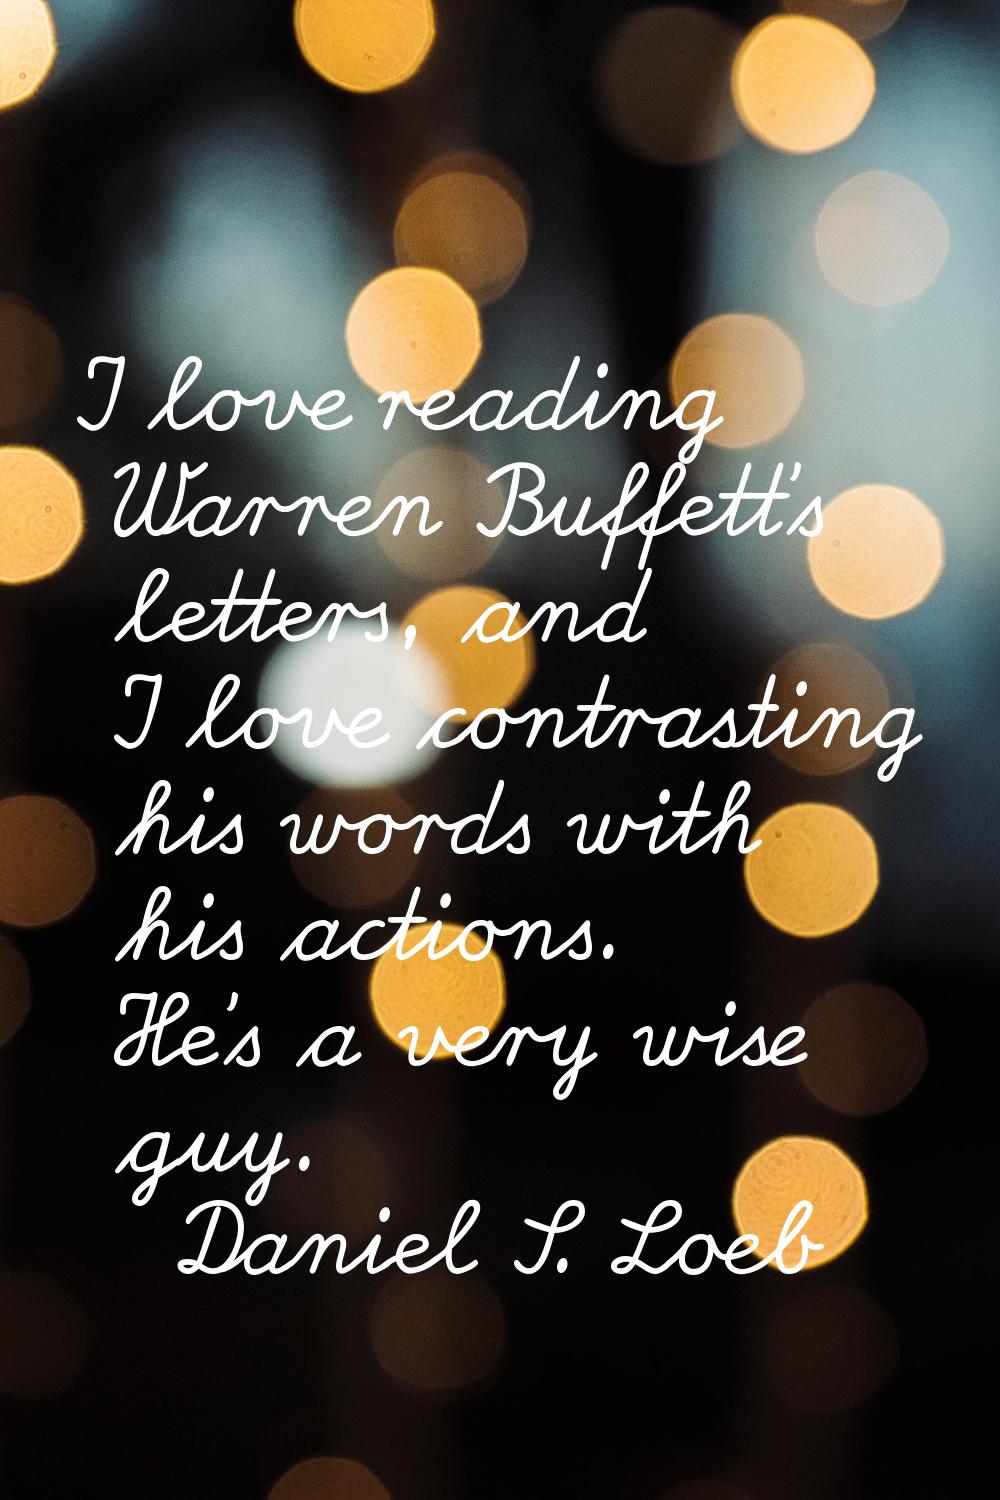 I love reading Warren Buffett's letters, and I love contrasting his words with his actions. He's a 